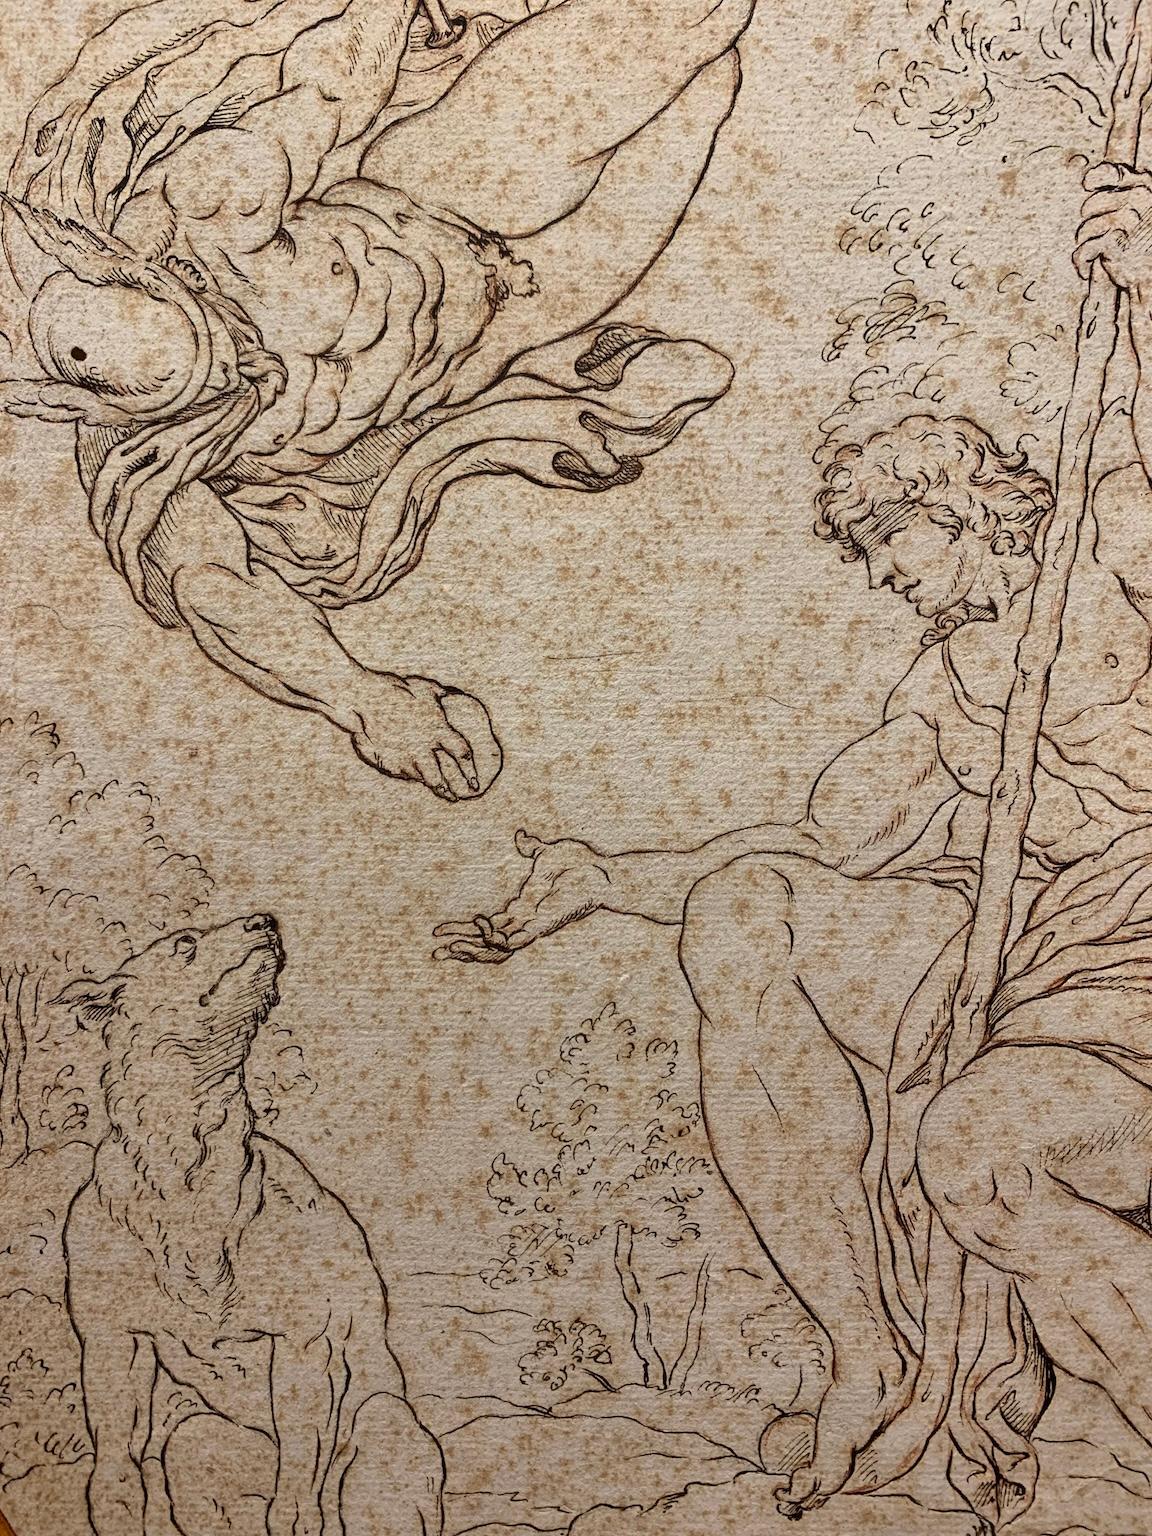 Pen drawing, pencil and sanguine elevations on paper. 
The subject echoes Annibale Carracci's frescoes at the Palazzo Farnese in Rome (1597-1607), specifically the episode in which Hermes delivers the "apple of discord" to Paris chosen to decide who